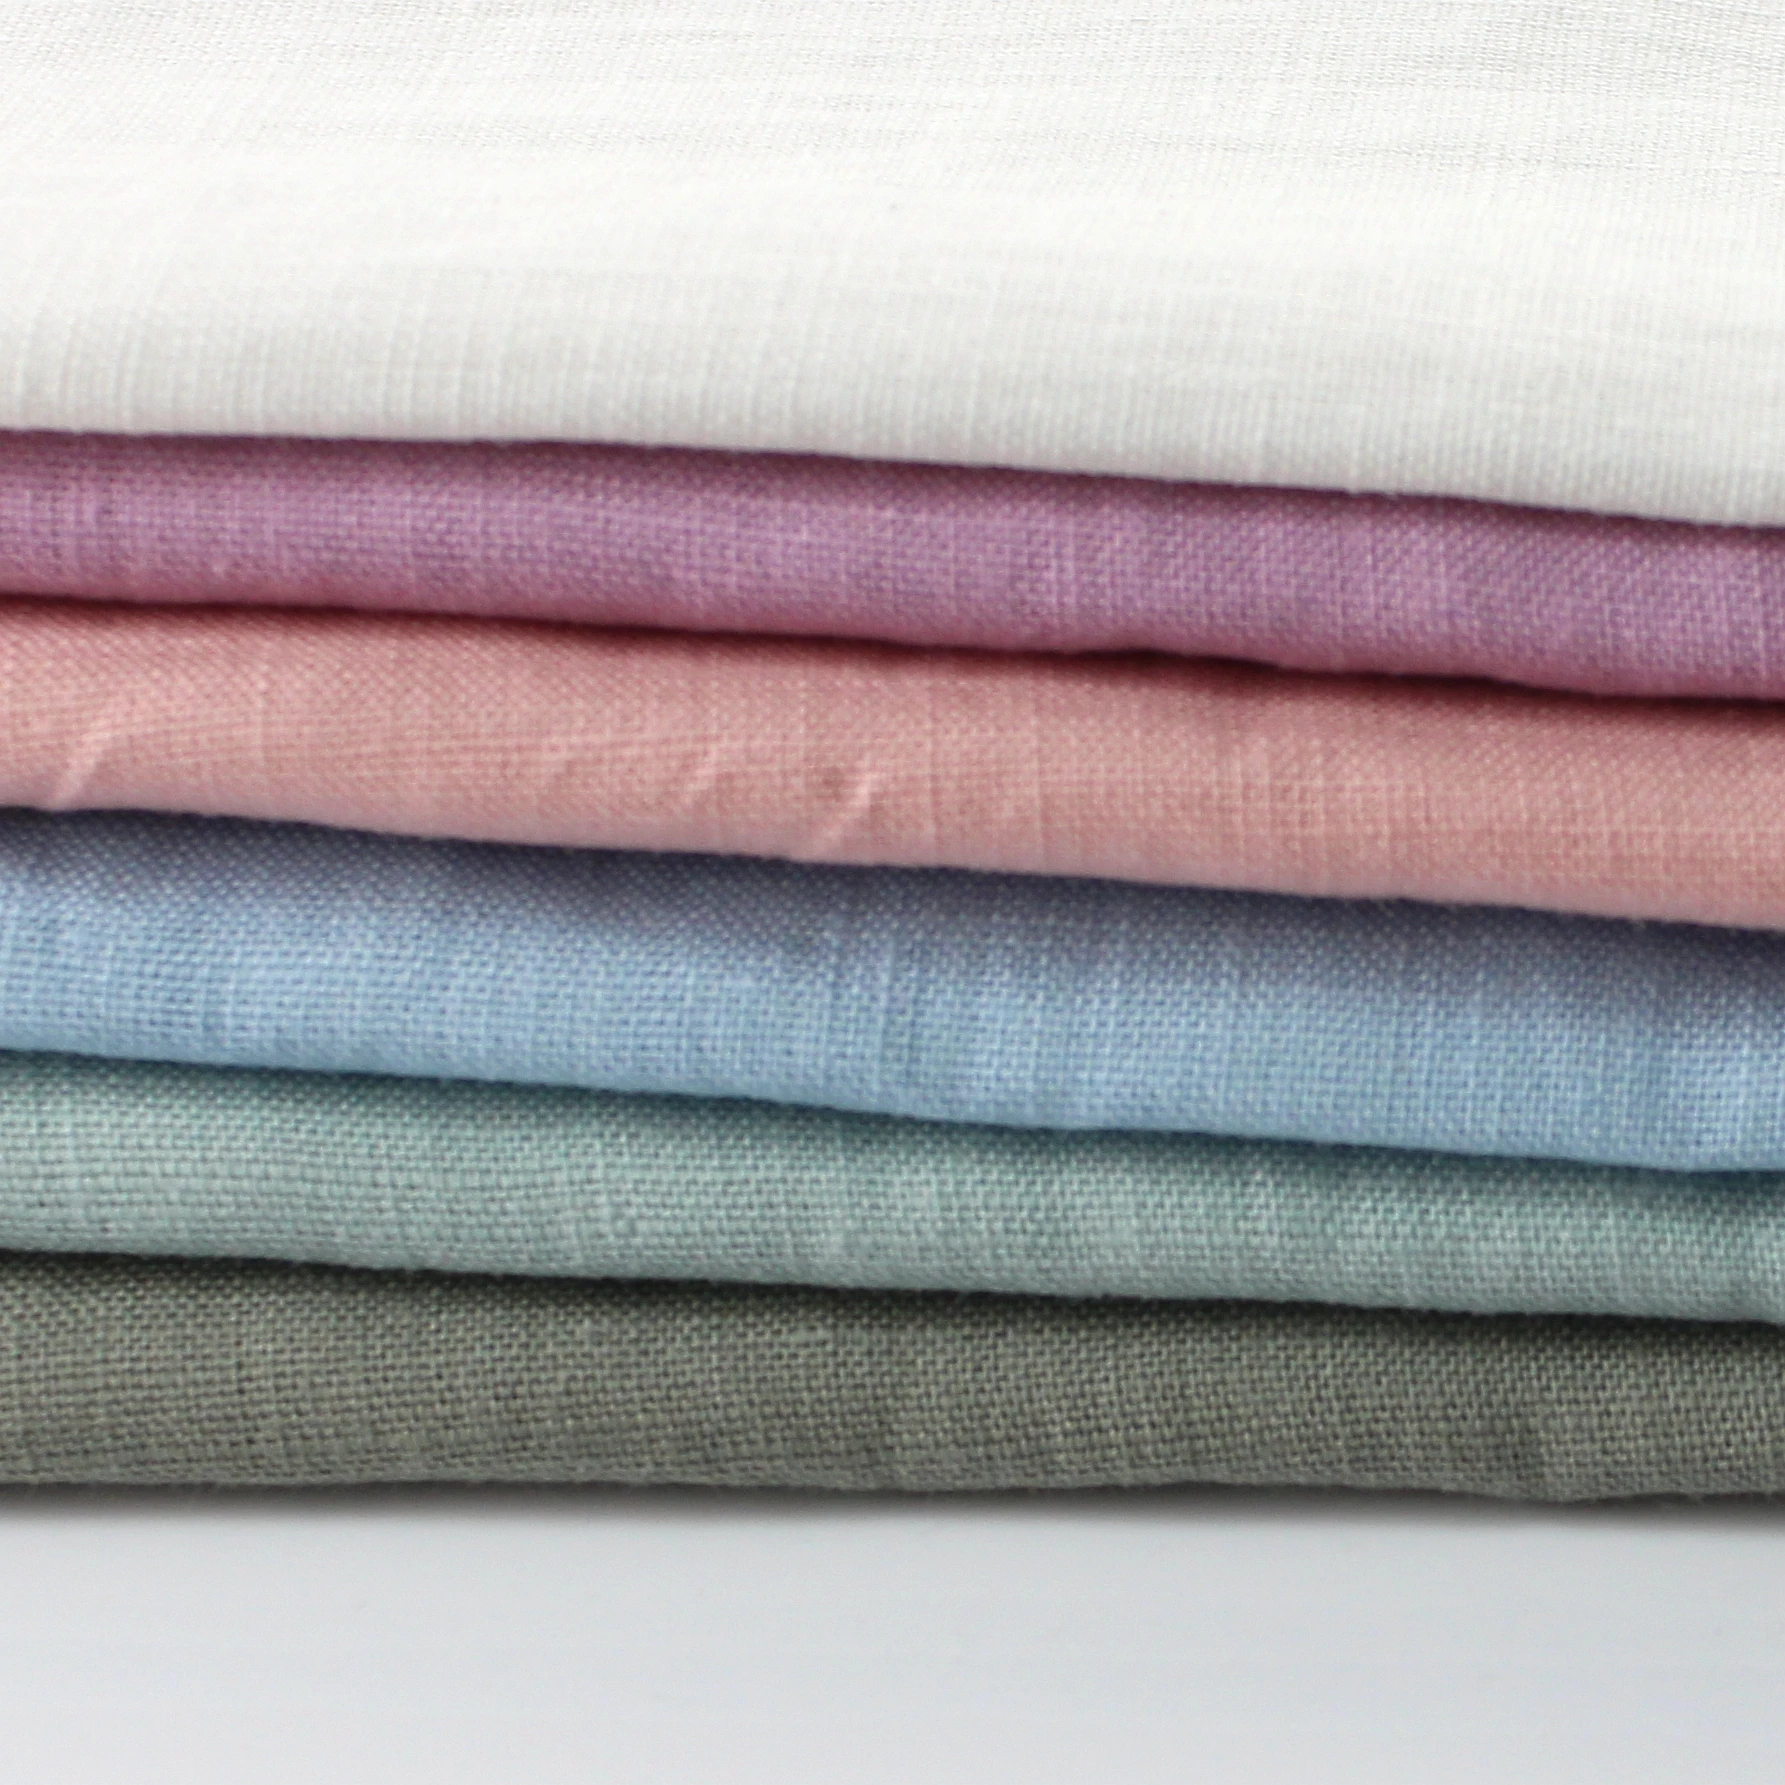 Pure natural 100 % linen fabric for garment